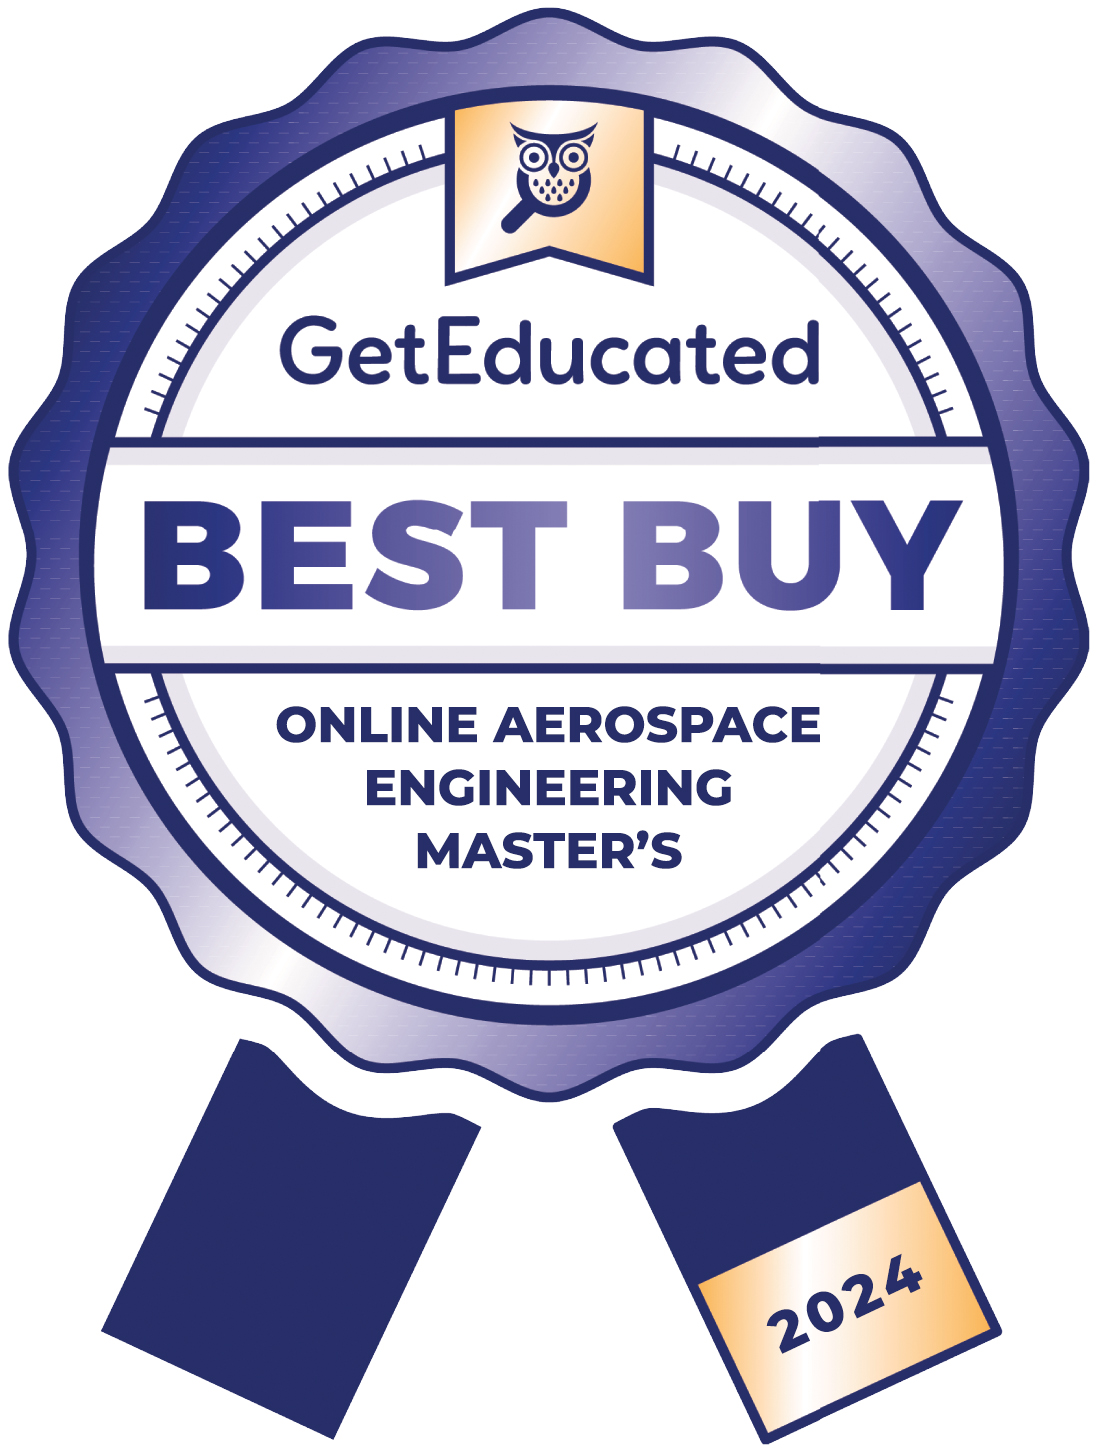 Rankings for the cheapest online aerospace engineering master's